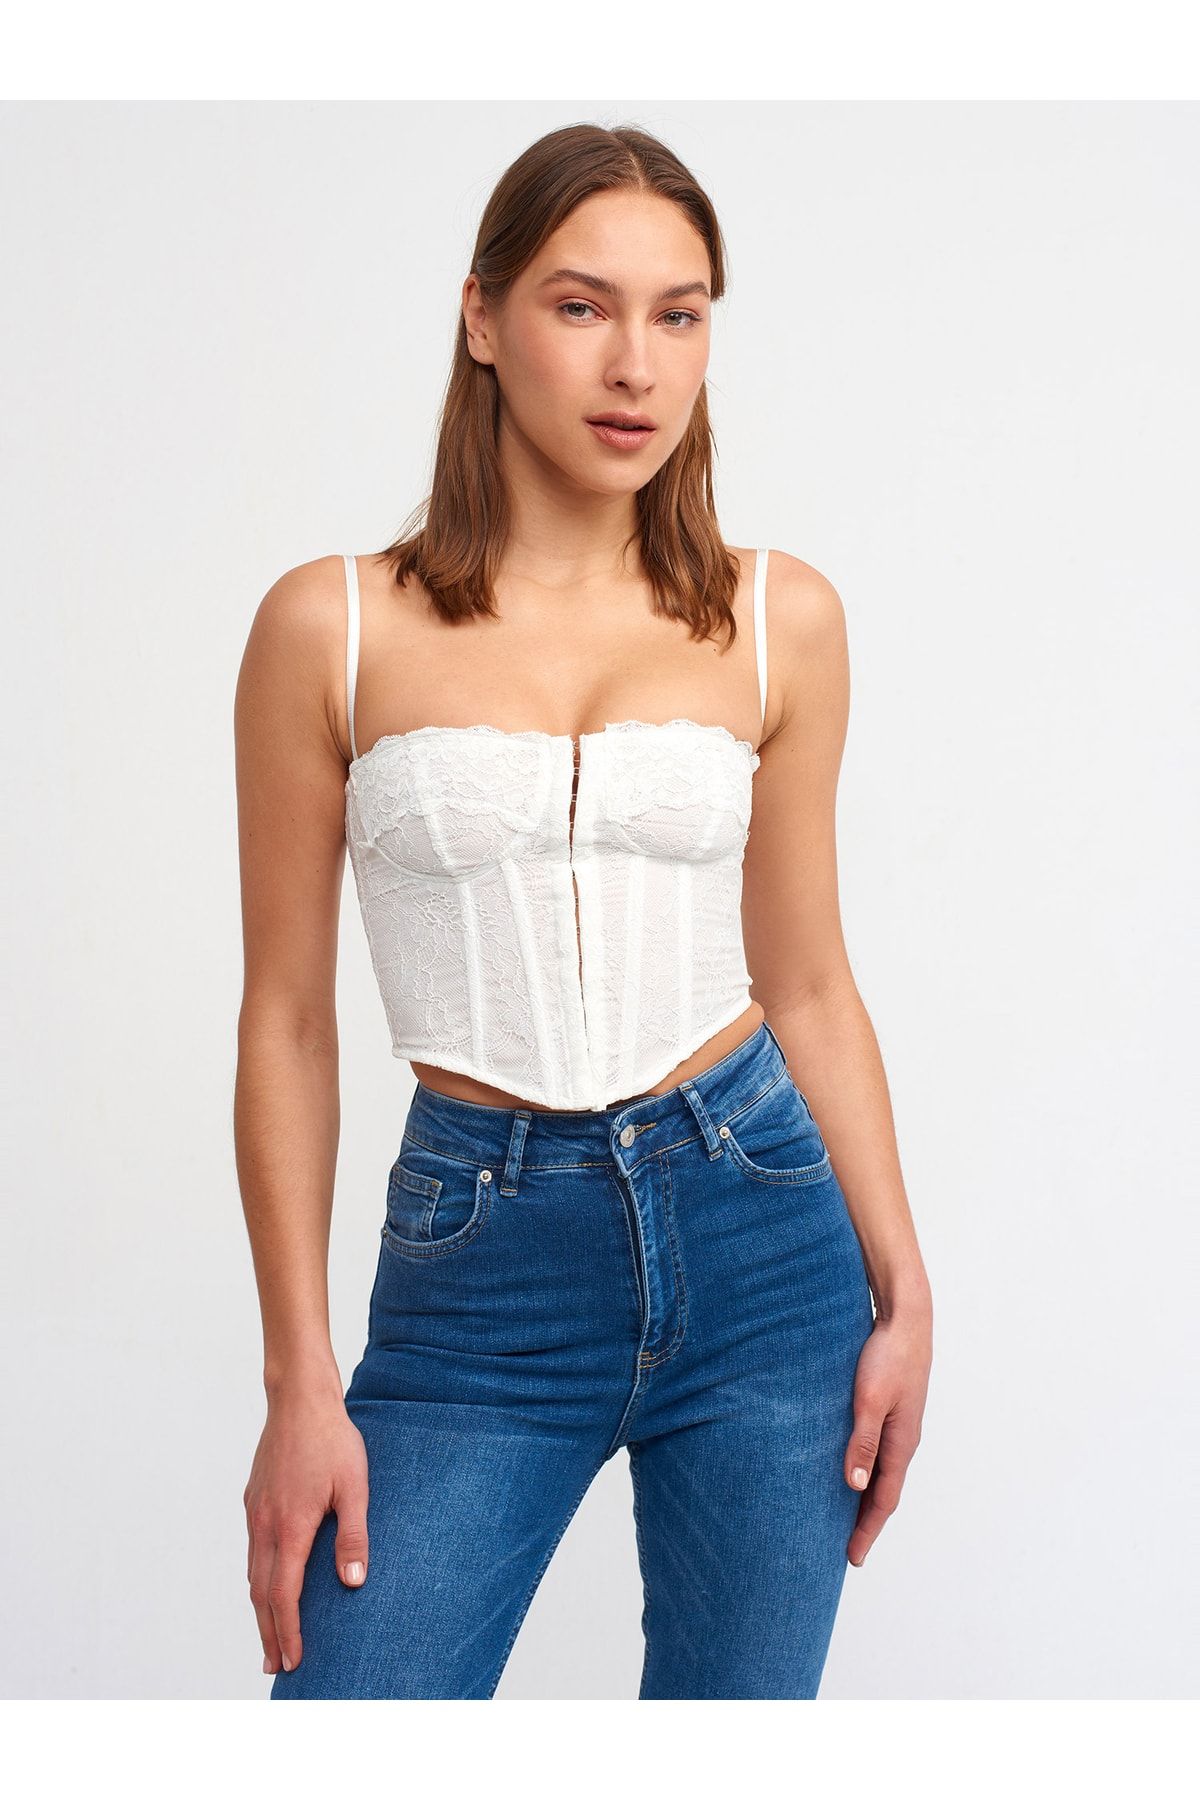 Dilvin Women's White Lace Detailed Corset Top 5852 - Trendyol